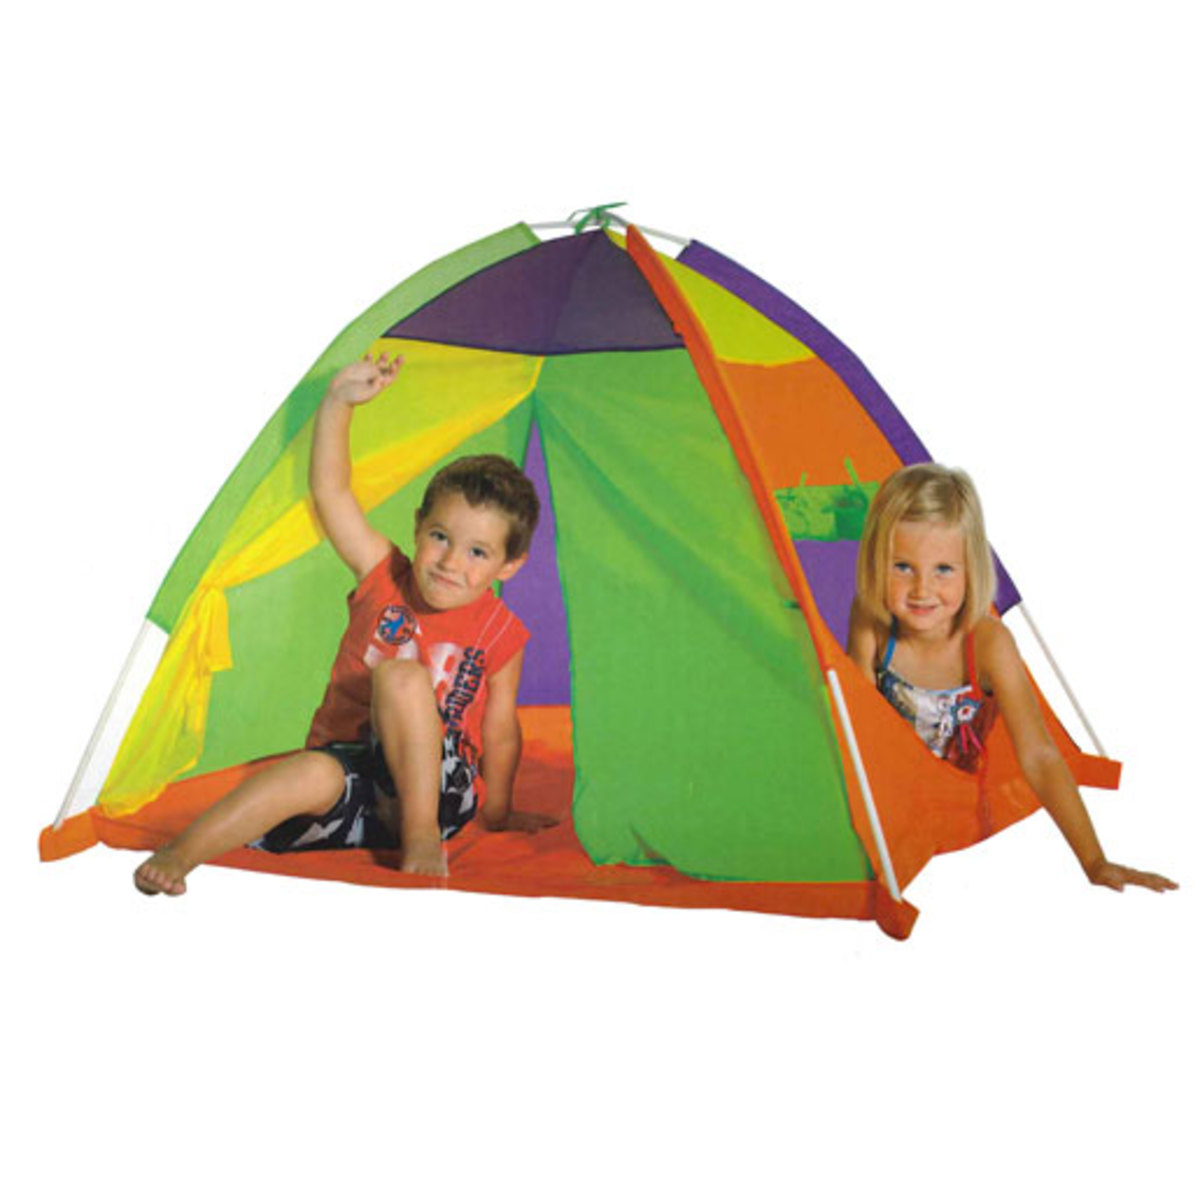  Five Star Dome Tent